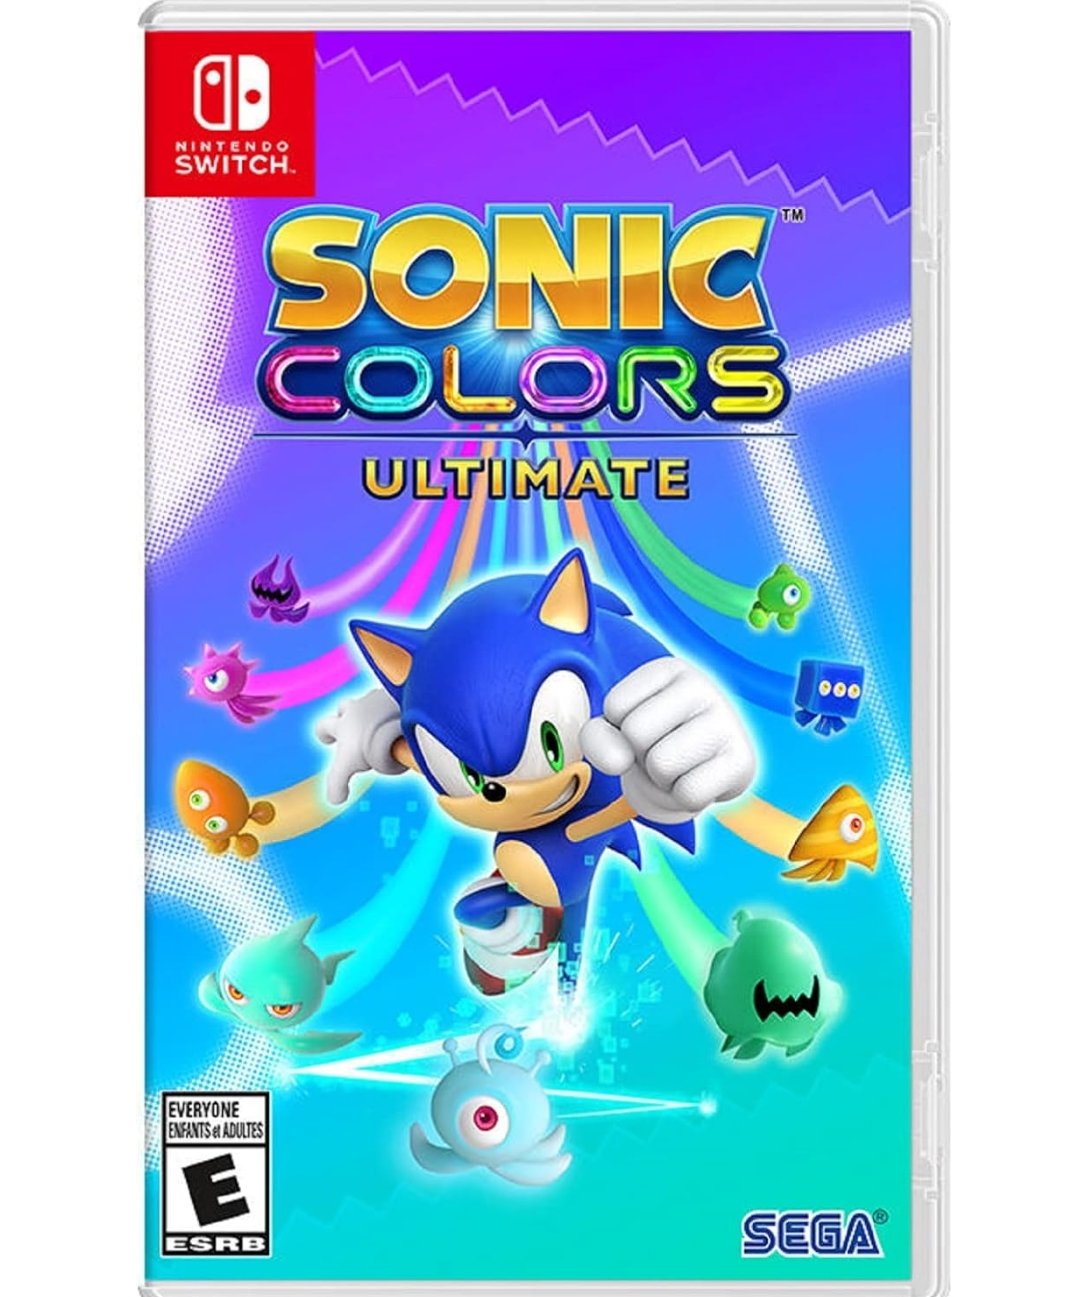 SONIC COLORS ULTIMATE SWITCH - EASY GAMES